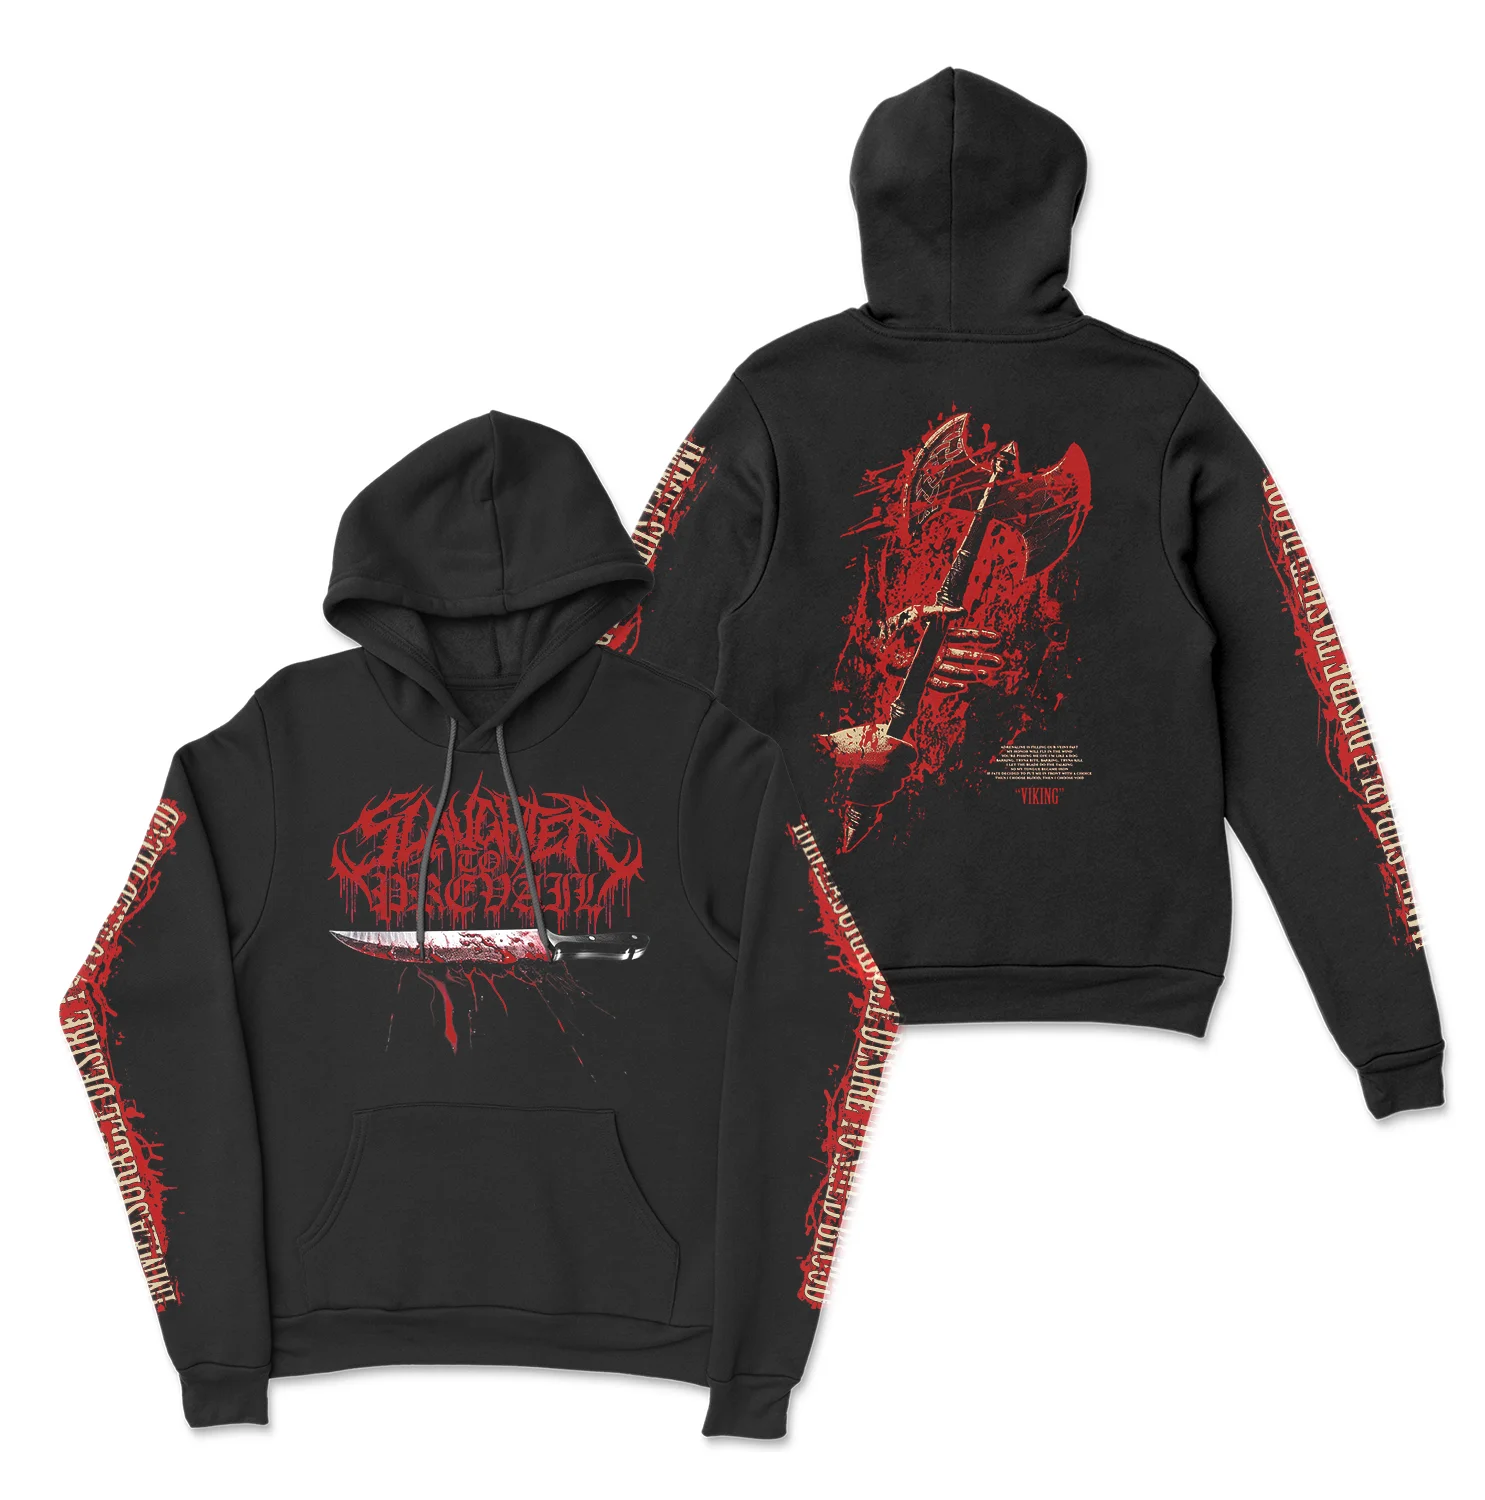 

New SLAUGHTER TO PREVAIL Russia Rock Heavy Mental Hoodies Mens Fashion Hoody Tops Harajuku Streetwear Oversized Hooded Clothes